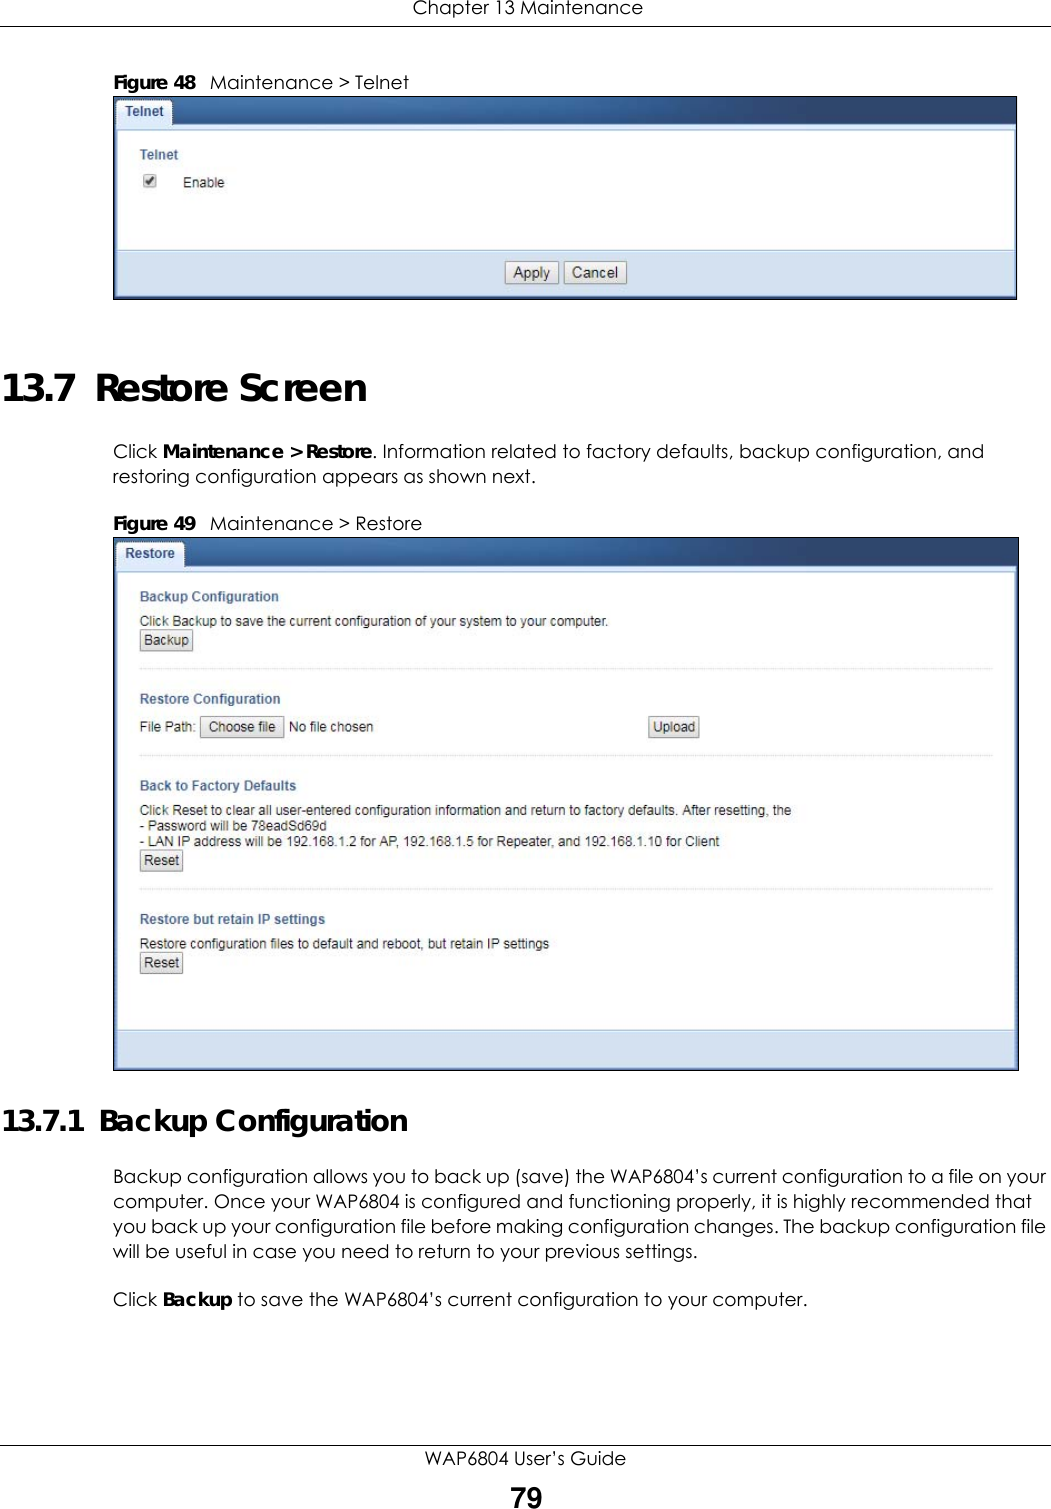  Chapter 13 MaintenanceWAP6804 User’s Guide79Figure 48   Maintenance &gt; Telnet 13.7  Restore ScreenClick Maintenance &gt; Restore. Information related to factory defaults, backup configuration, and restoring configuration appears as shown next.Figure 49   Maintenance &gt; Restore 13.7.1  Backup ConfigurationBackup configuration allows you to back up (save) the WAP6804’s current configuration to a file on your computer. Once your WAP6804 is configured and functioning properly, it is highly recommended that you back up your configuration file before making configuration changes. The backup configuration file will be useful in case you need to return to your previous settings.Click Backup to save the WAP6804’s current configuration to your computer.